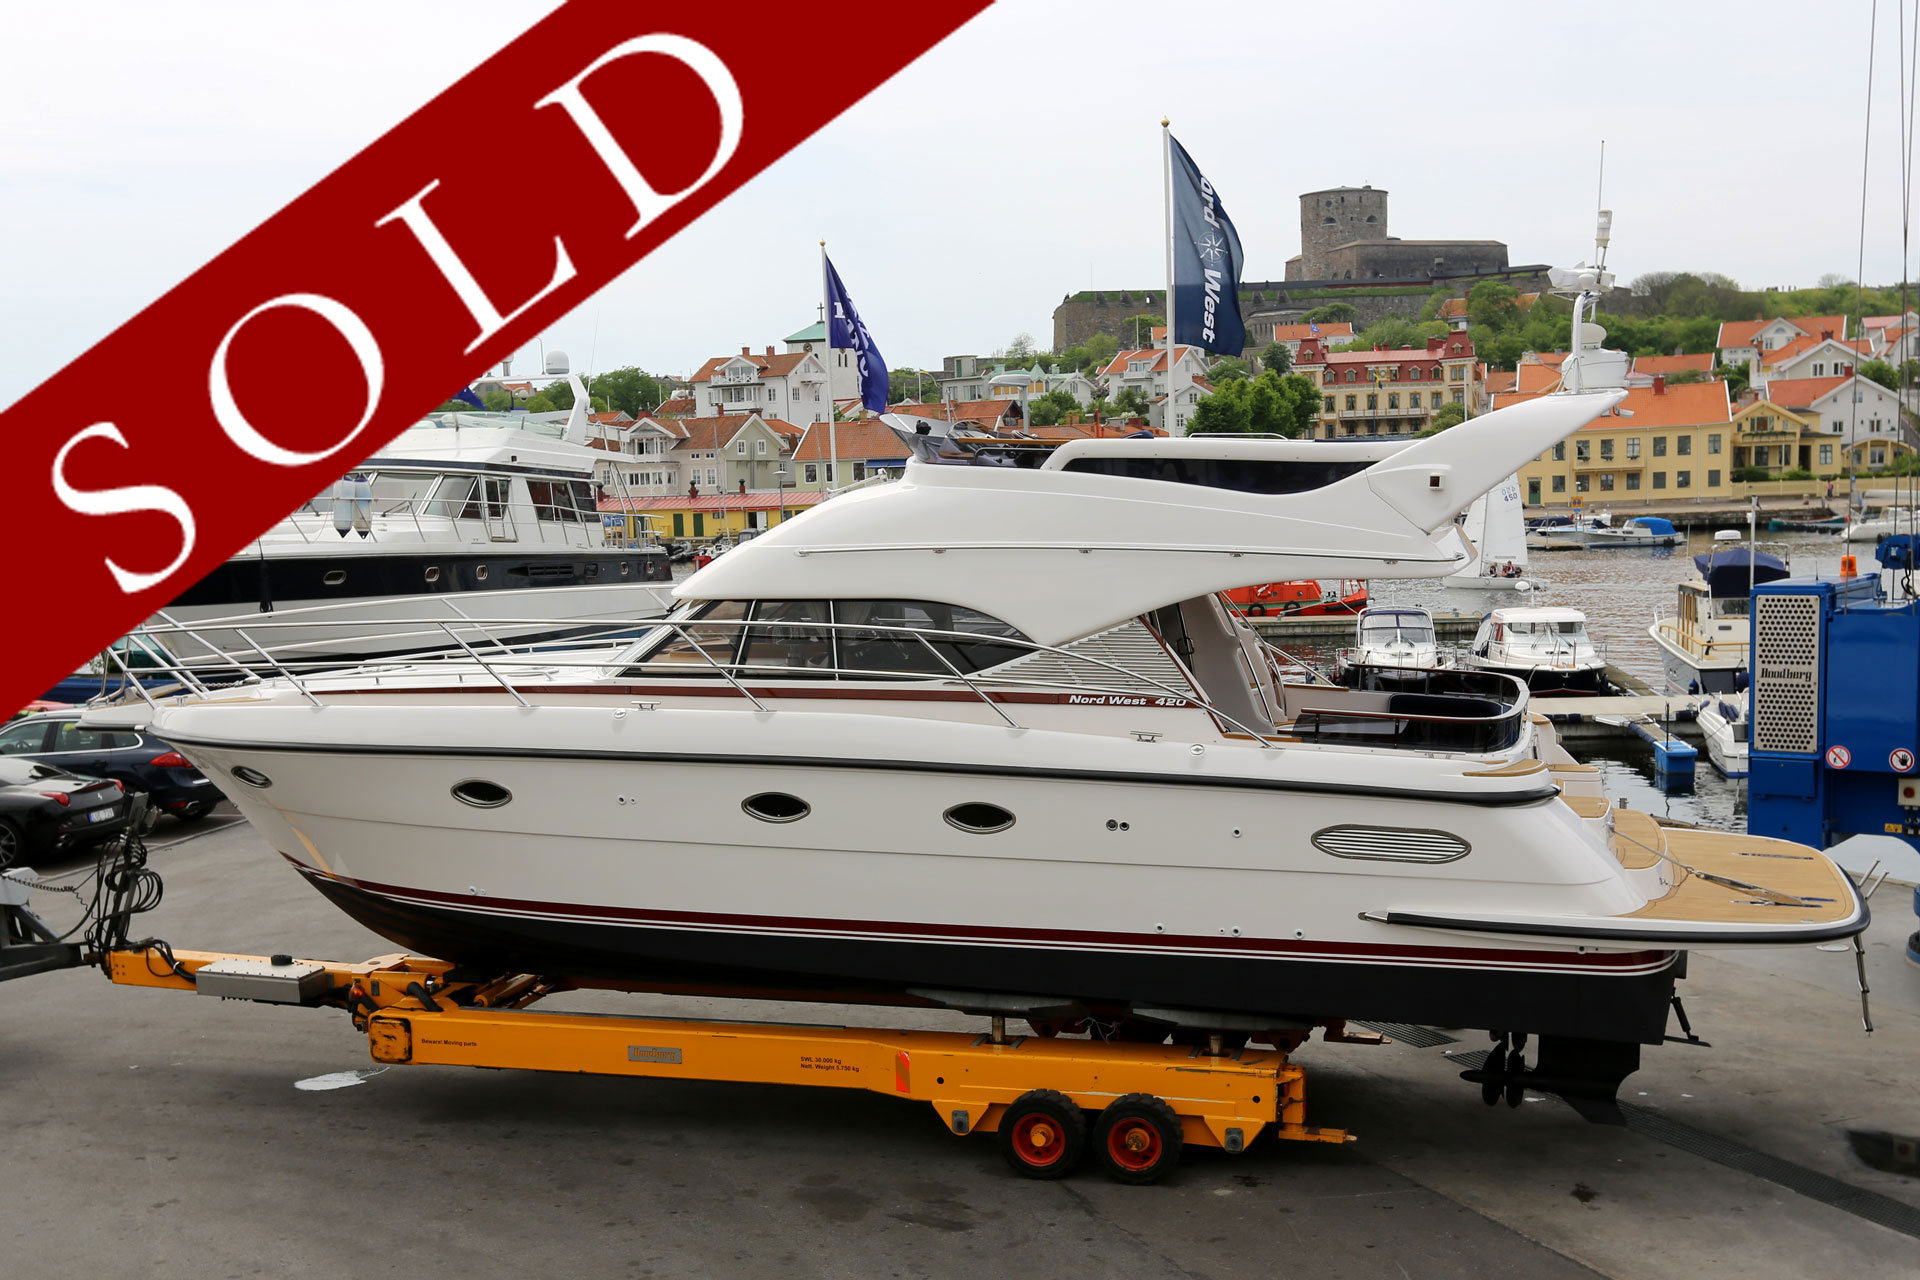 Nord West 420 sold